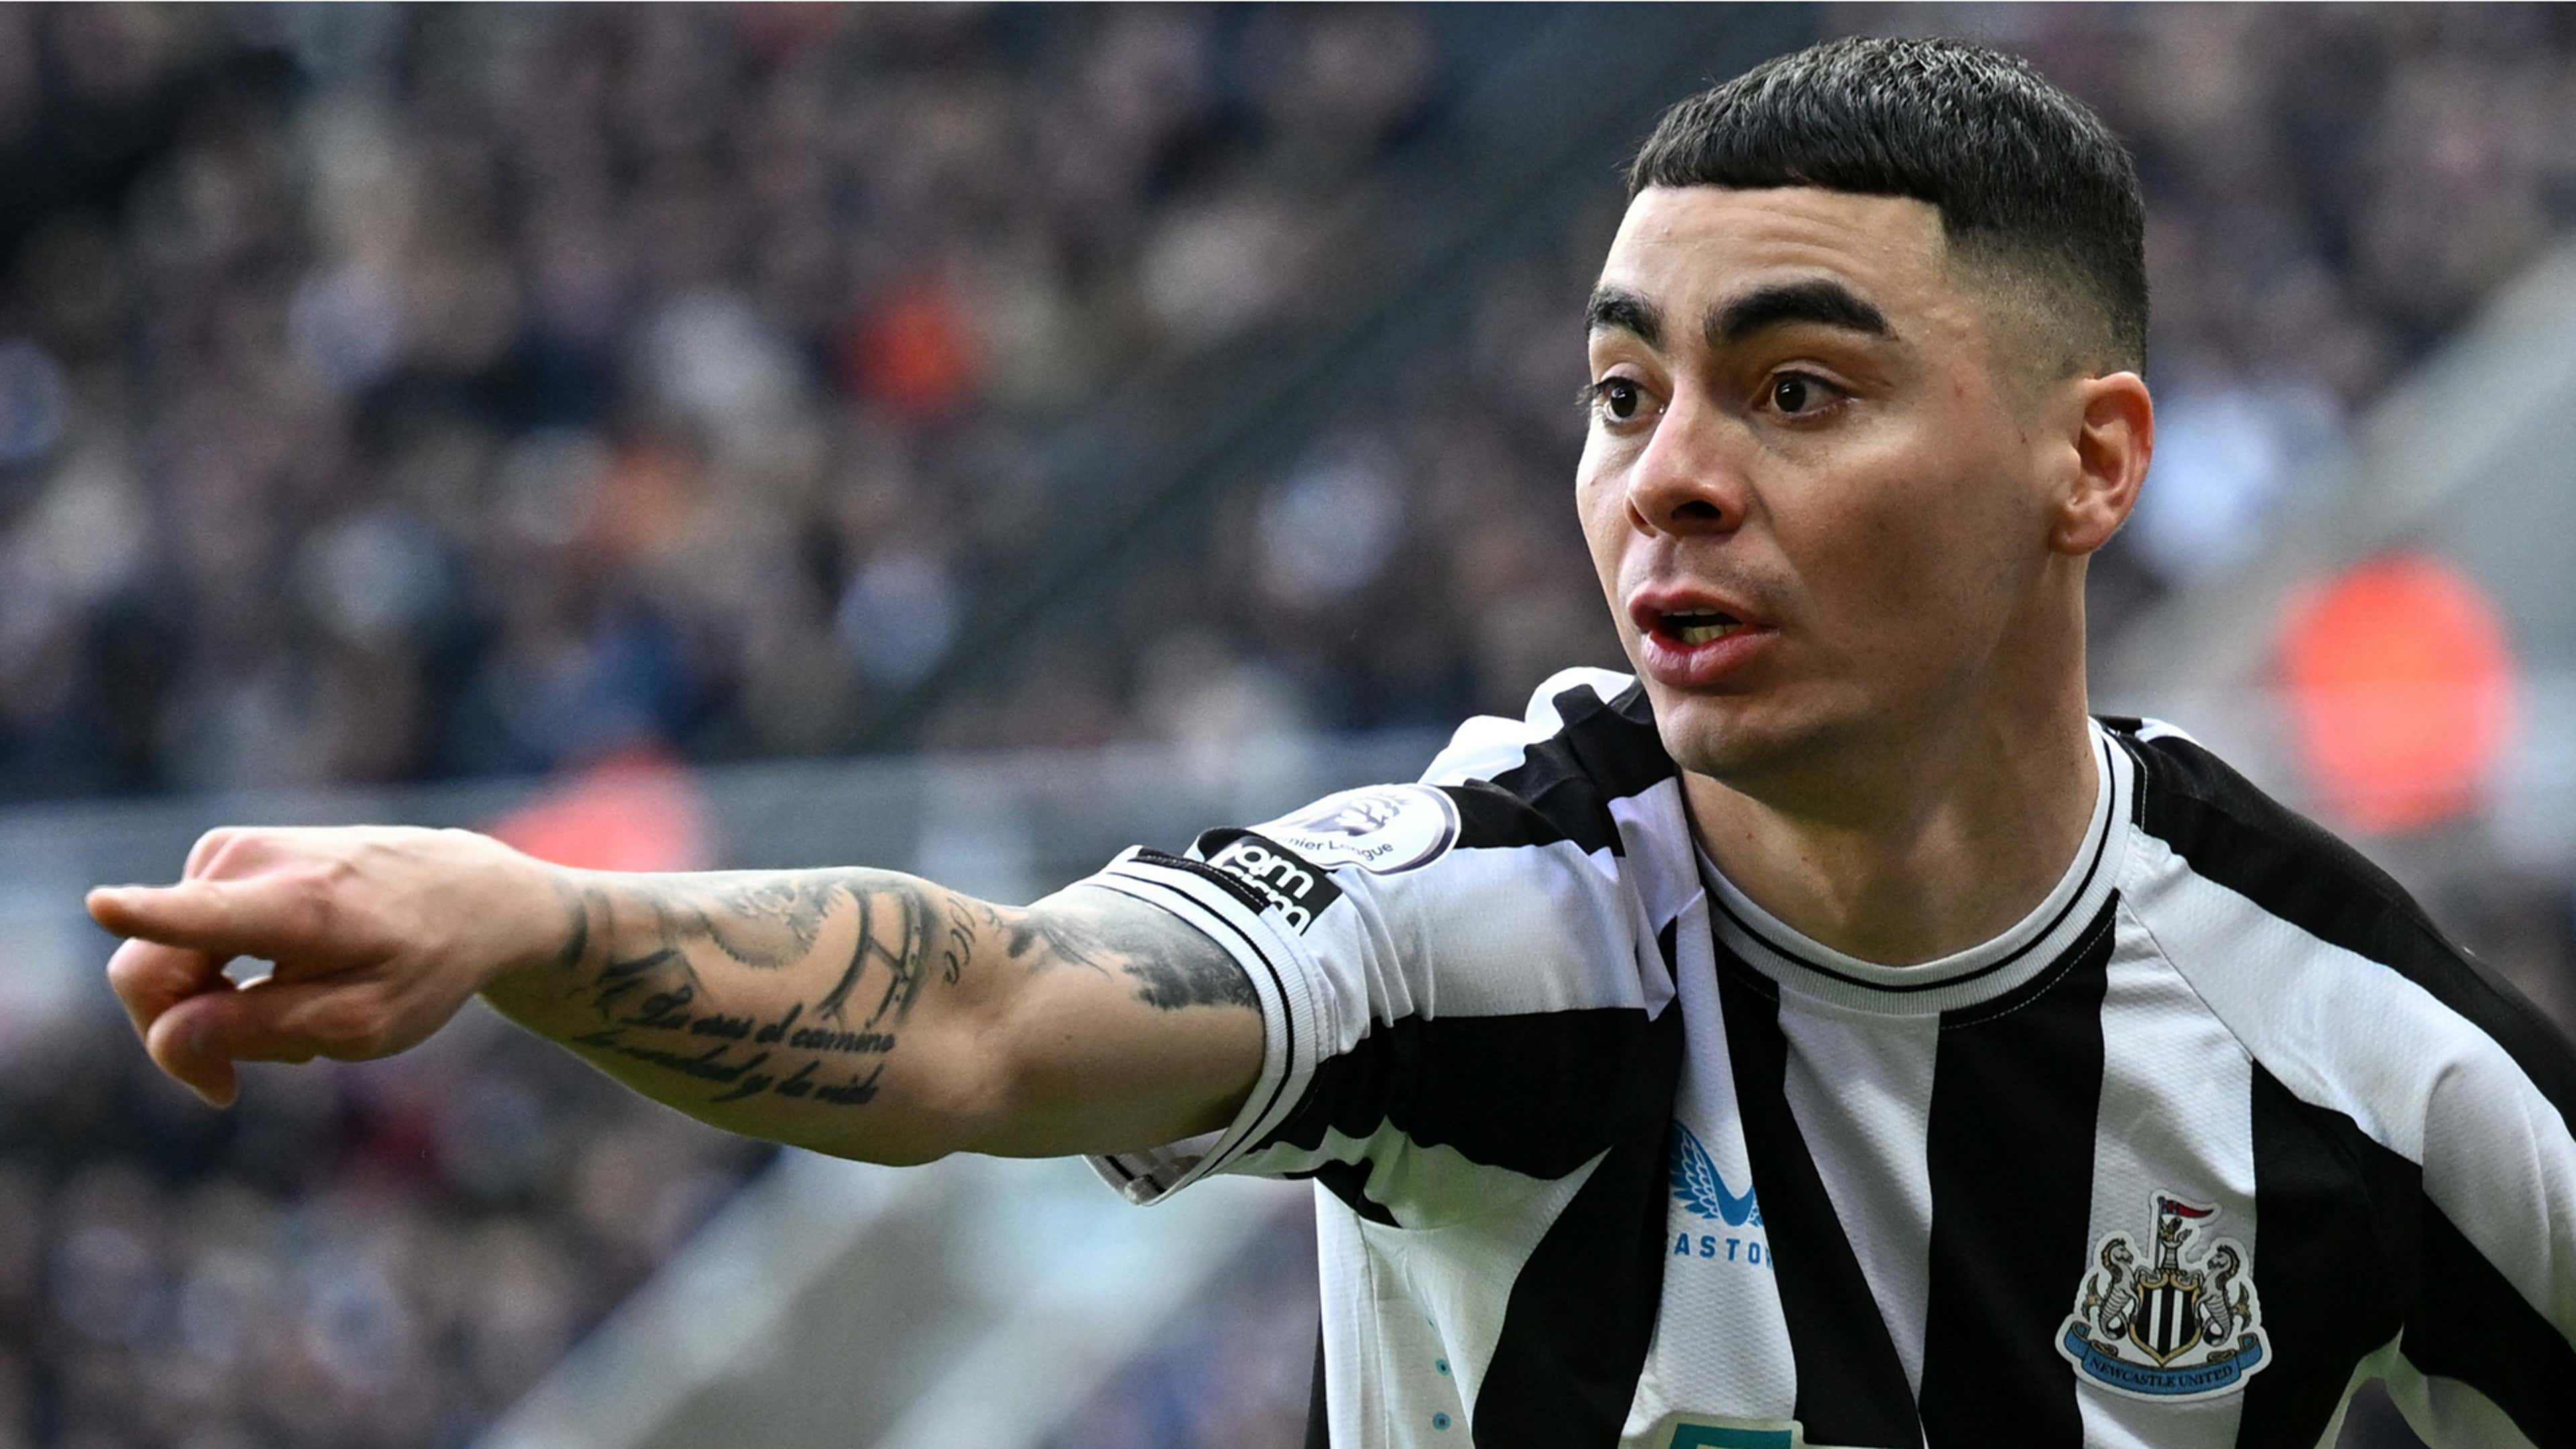  Miguel Almiron of Newcastle United gestures during the Premier League match between Newcastle United and West Ham United at St. James' Park on February 19, 2023 in Newcastle upon Tyne, England. Callum Wilson and Miguel Almiron are reportedly both considering leaving Newcastle United in the summer.